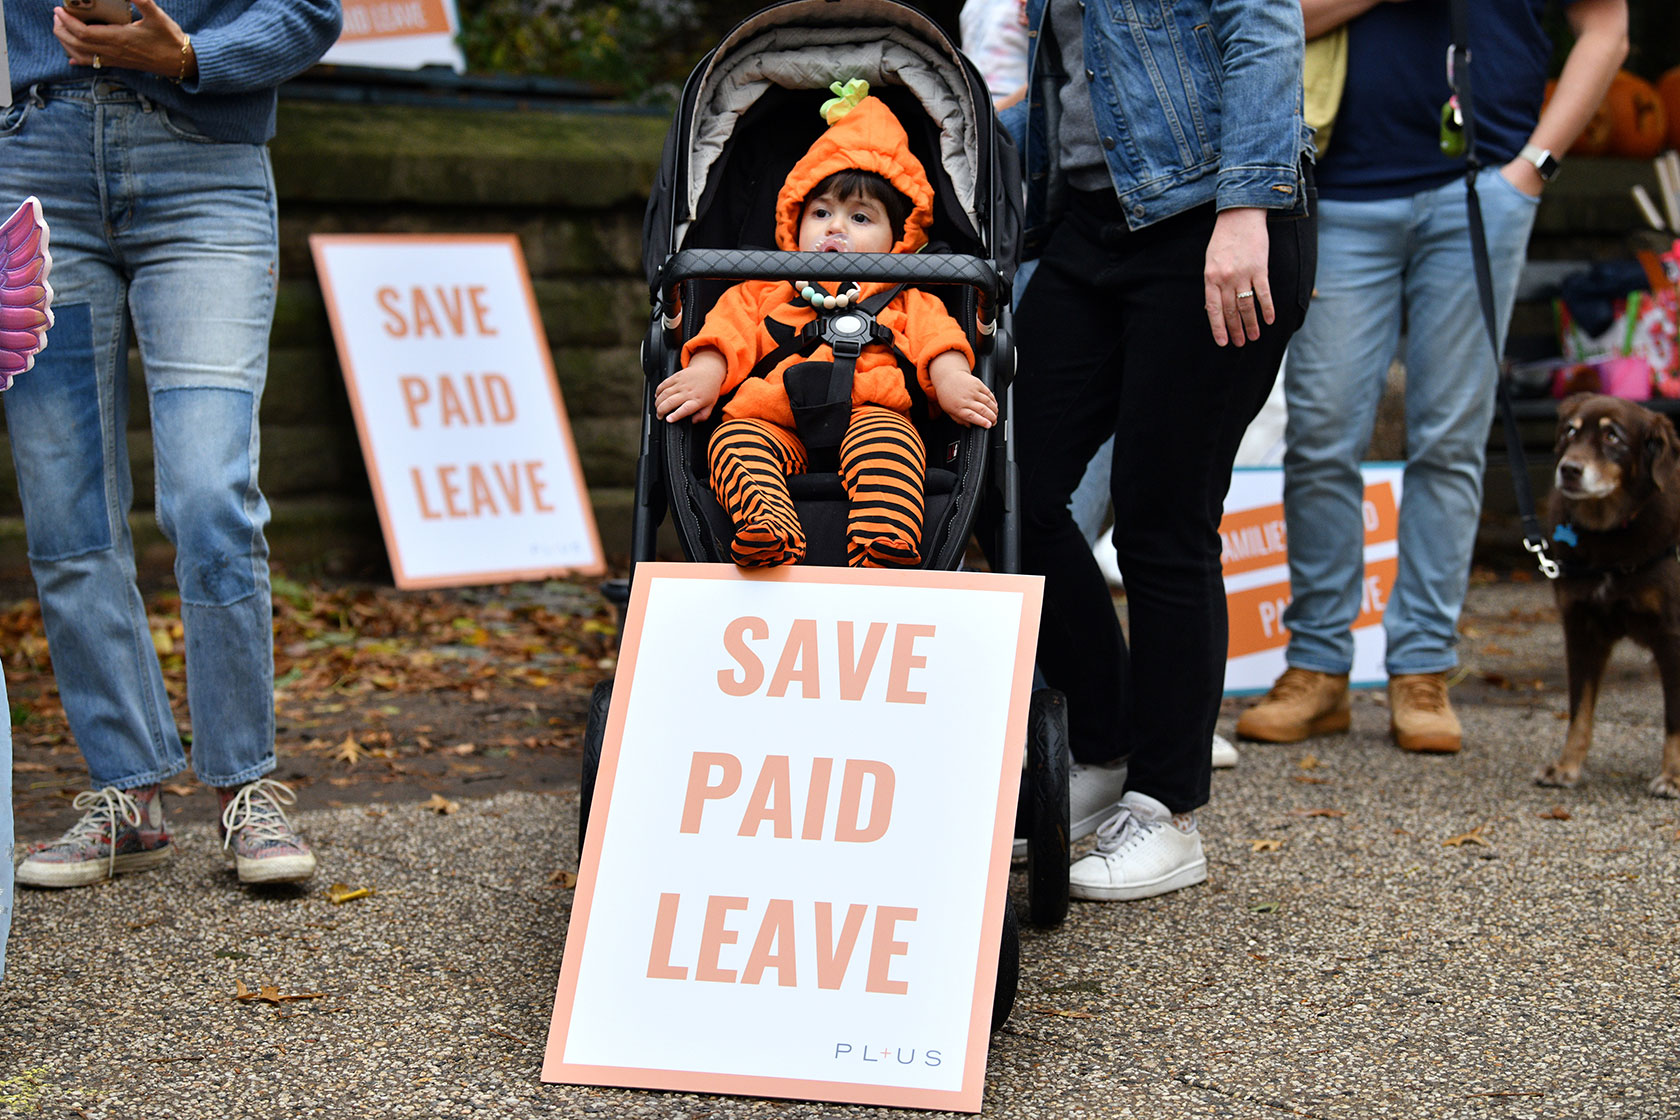 Photo shows a baby in all orange sitting in a stroller with a sign leaning against the stroller that reads 